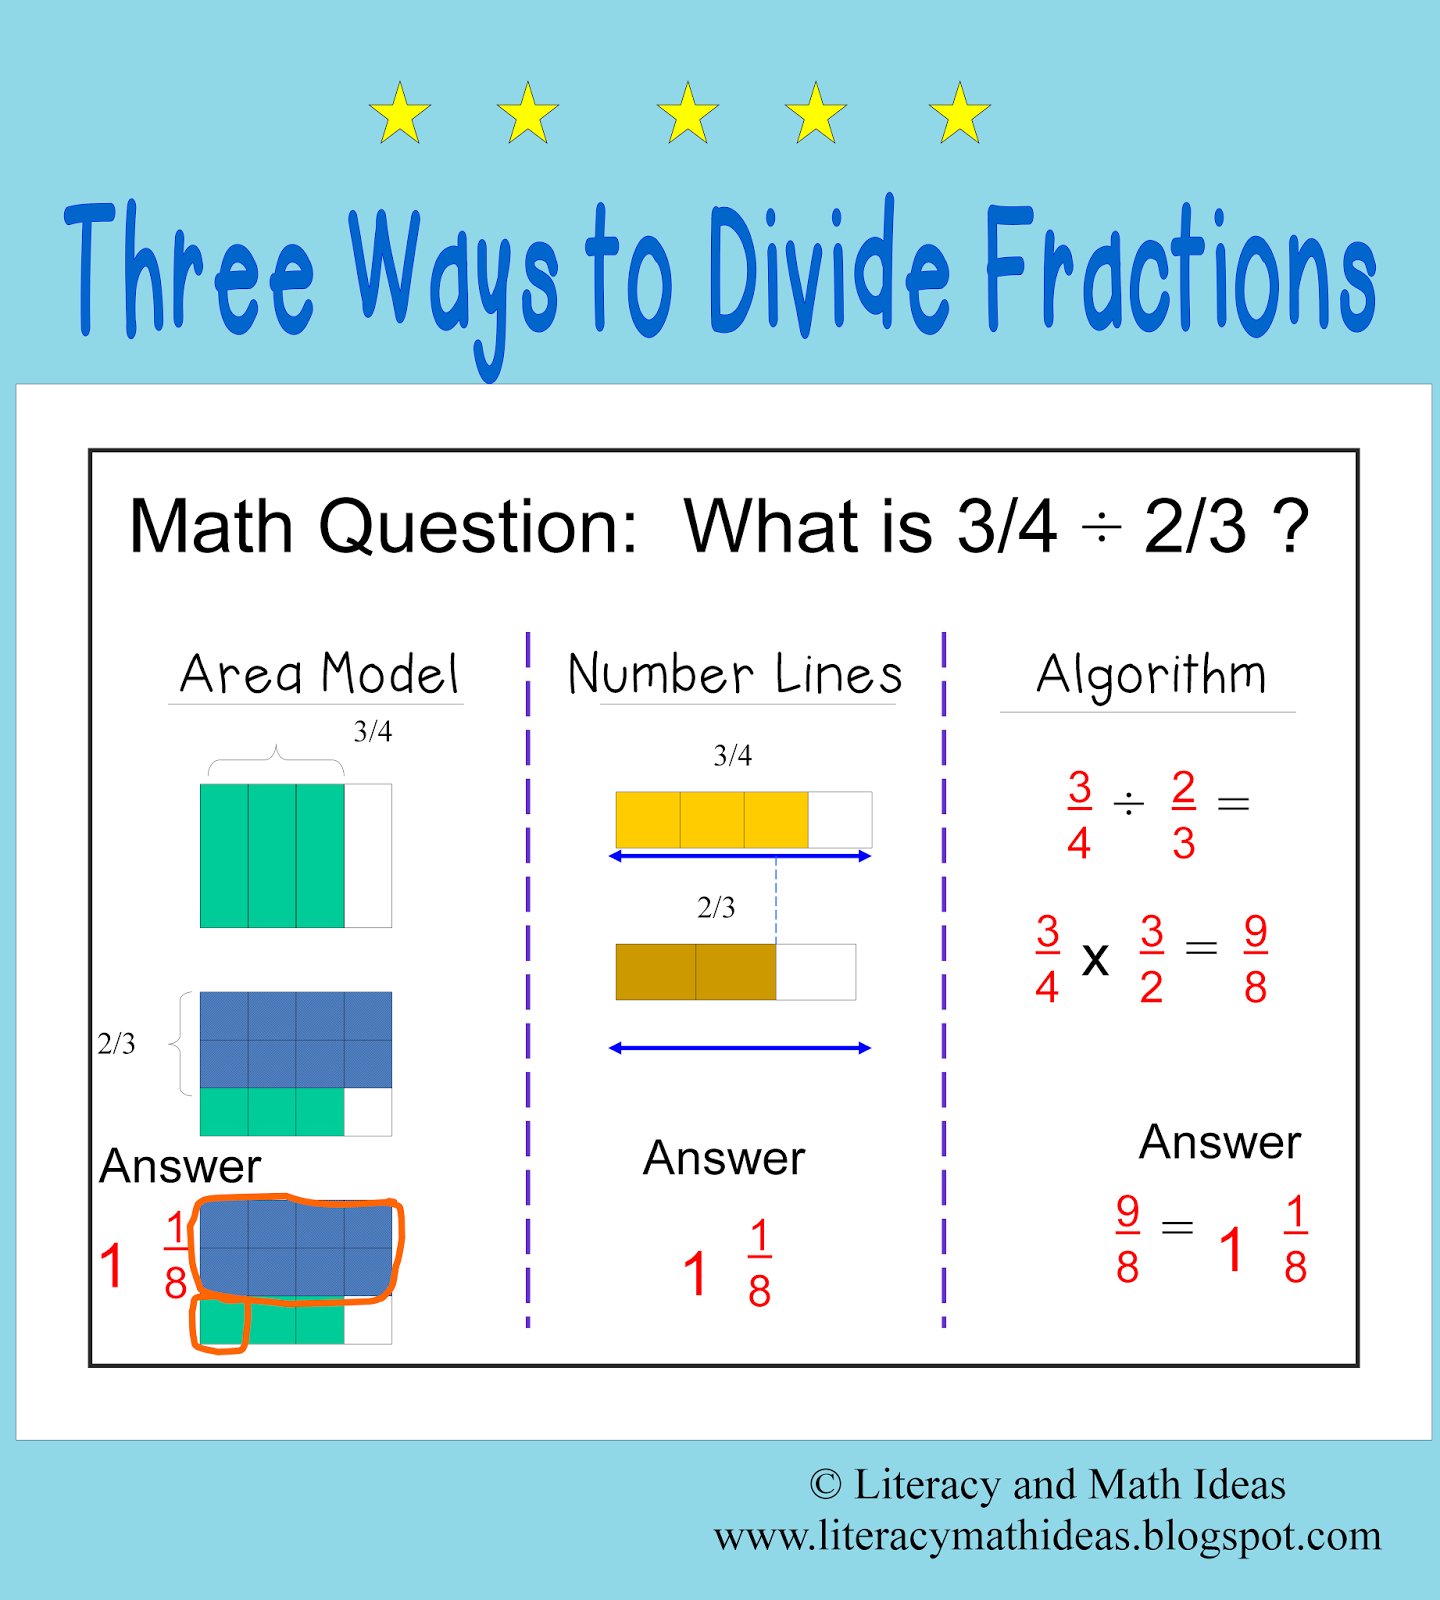 literacy-math-ideas-three-ways-to-divide-fractions